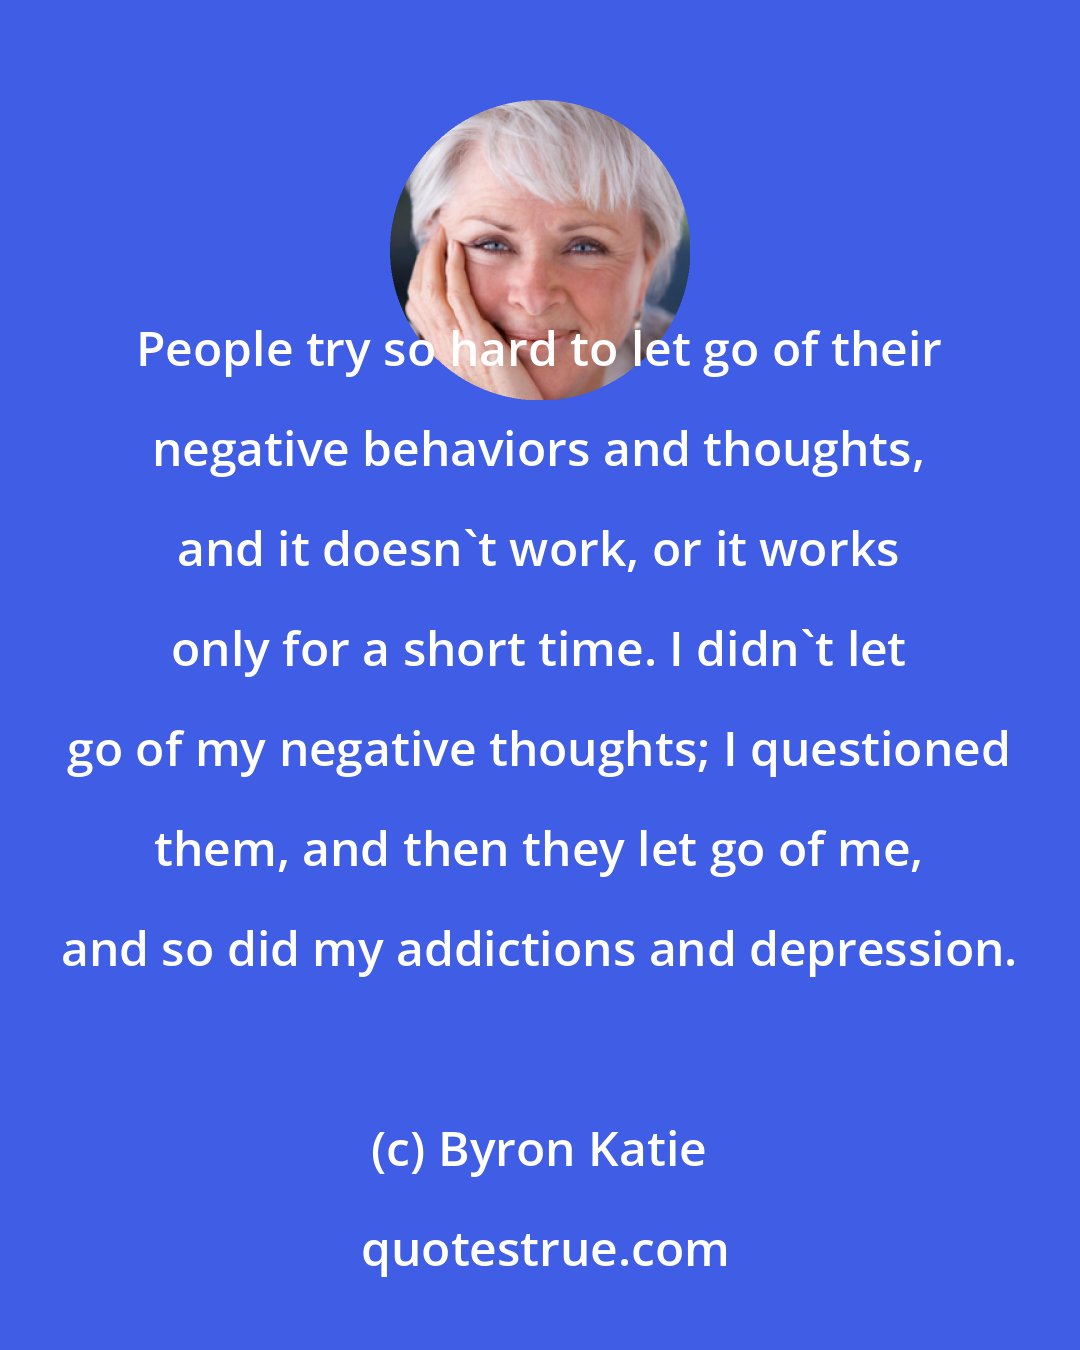 Byron Katie: People try so hard to let go of their negative behaviors and thoughts, and it doesn't work, or it works only for a short time. I didn't let go of my negative thoughts; I questioned them, and then they let go of me, and so did my addictions and depression.